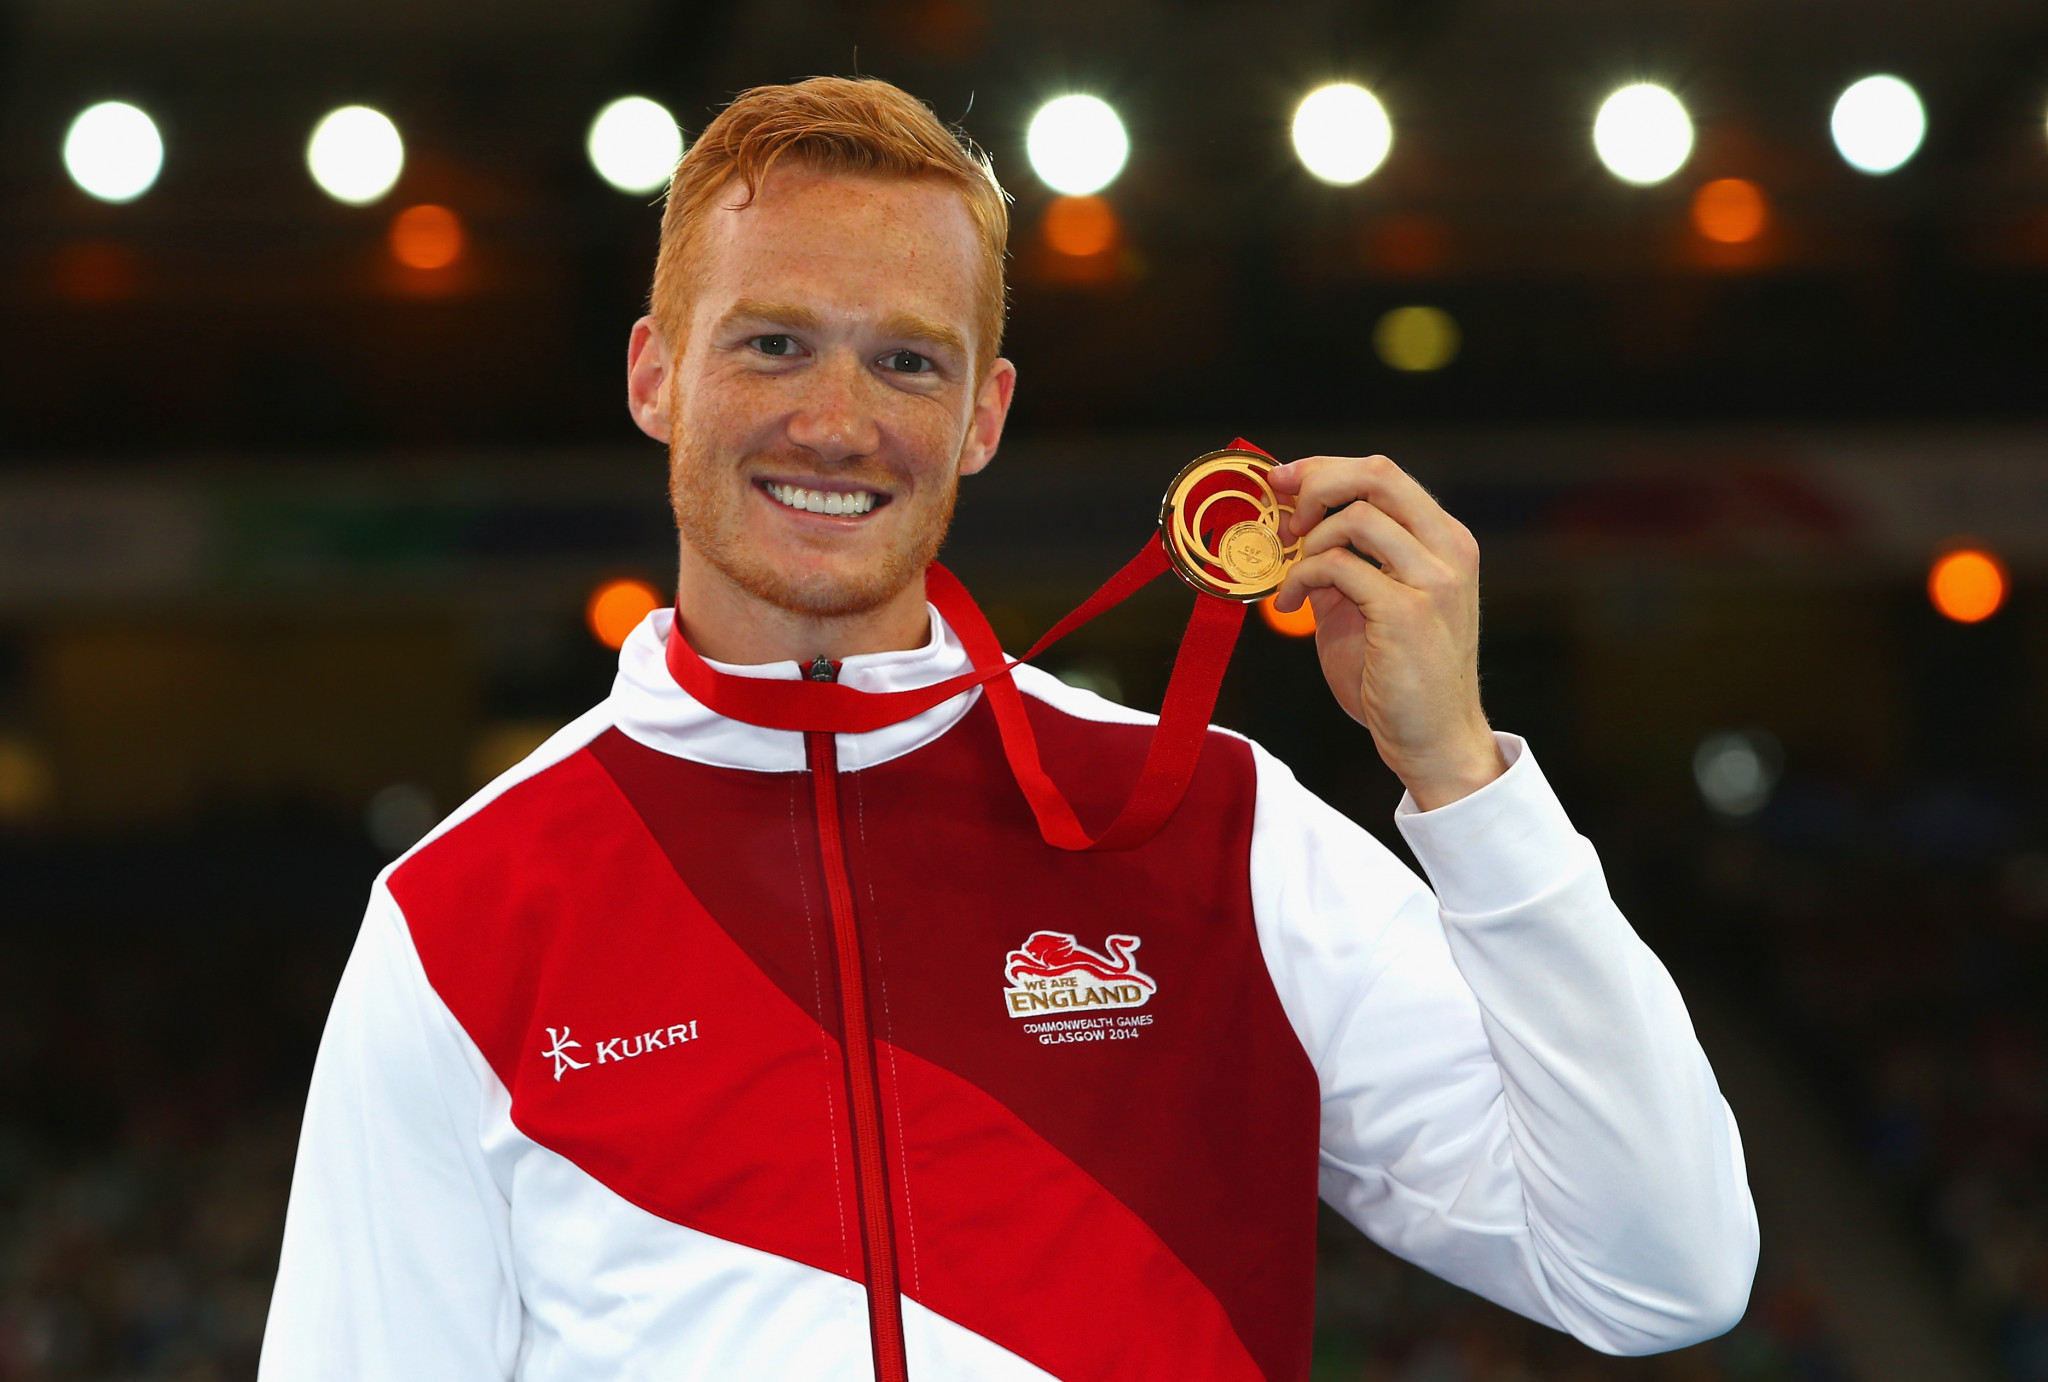 Greg Rutherford is the reigning Commonwealth Games long jump champion ©Getty Images